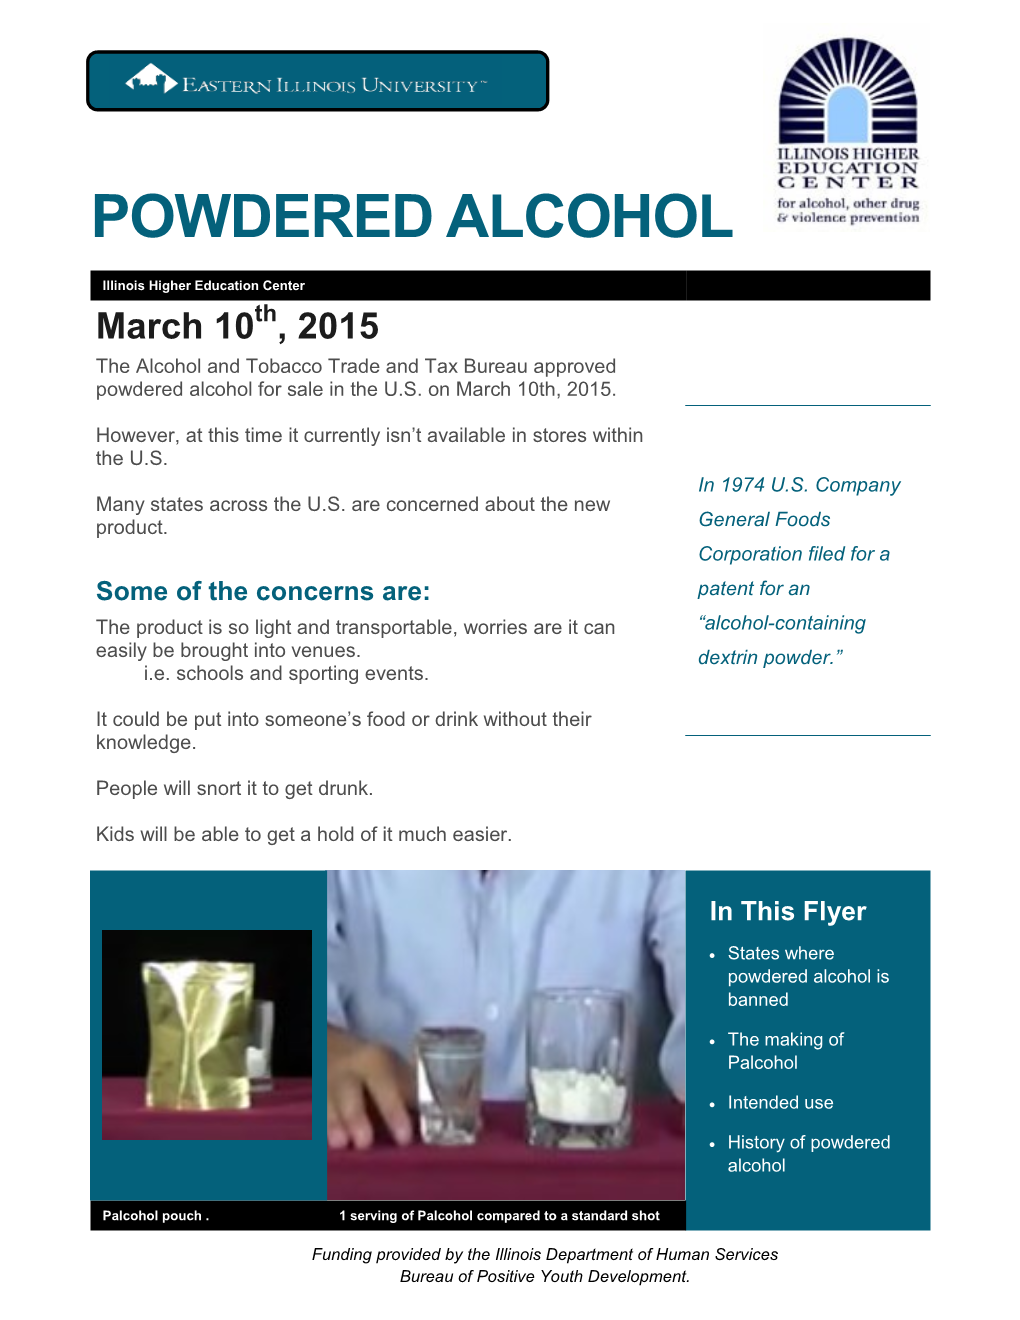 Powdered Alcohol Flyer